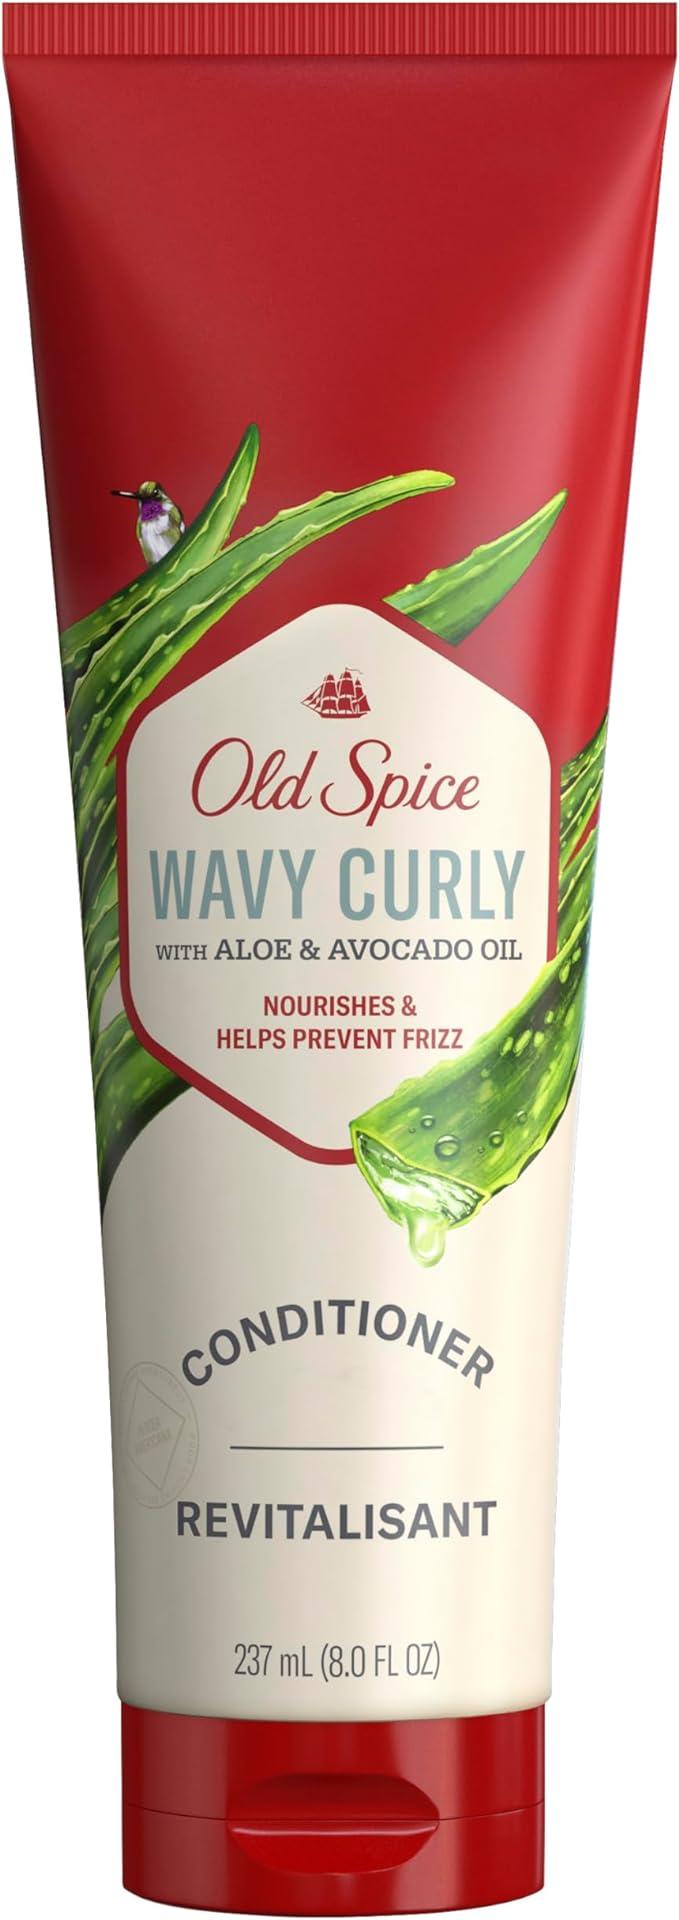 old spice wavy curly hair conditioner with aloe and avocado oil 237 ml  old spice b09t3rvrmg